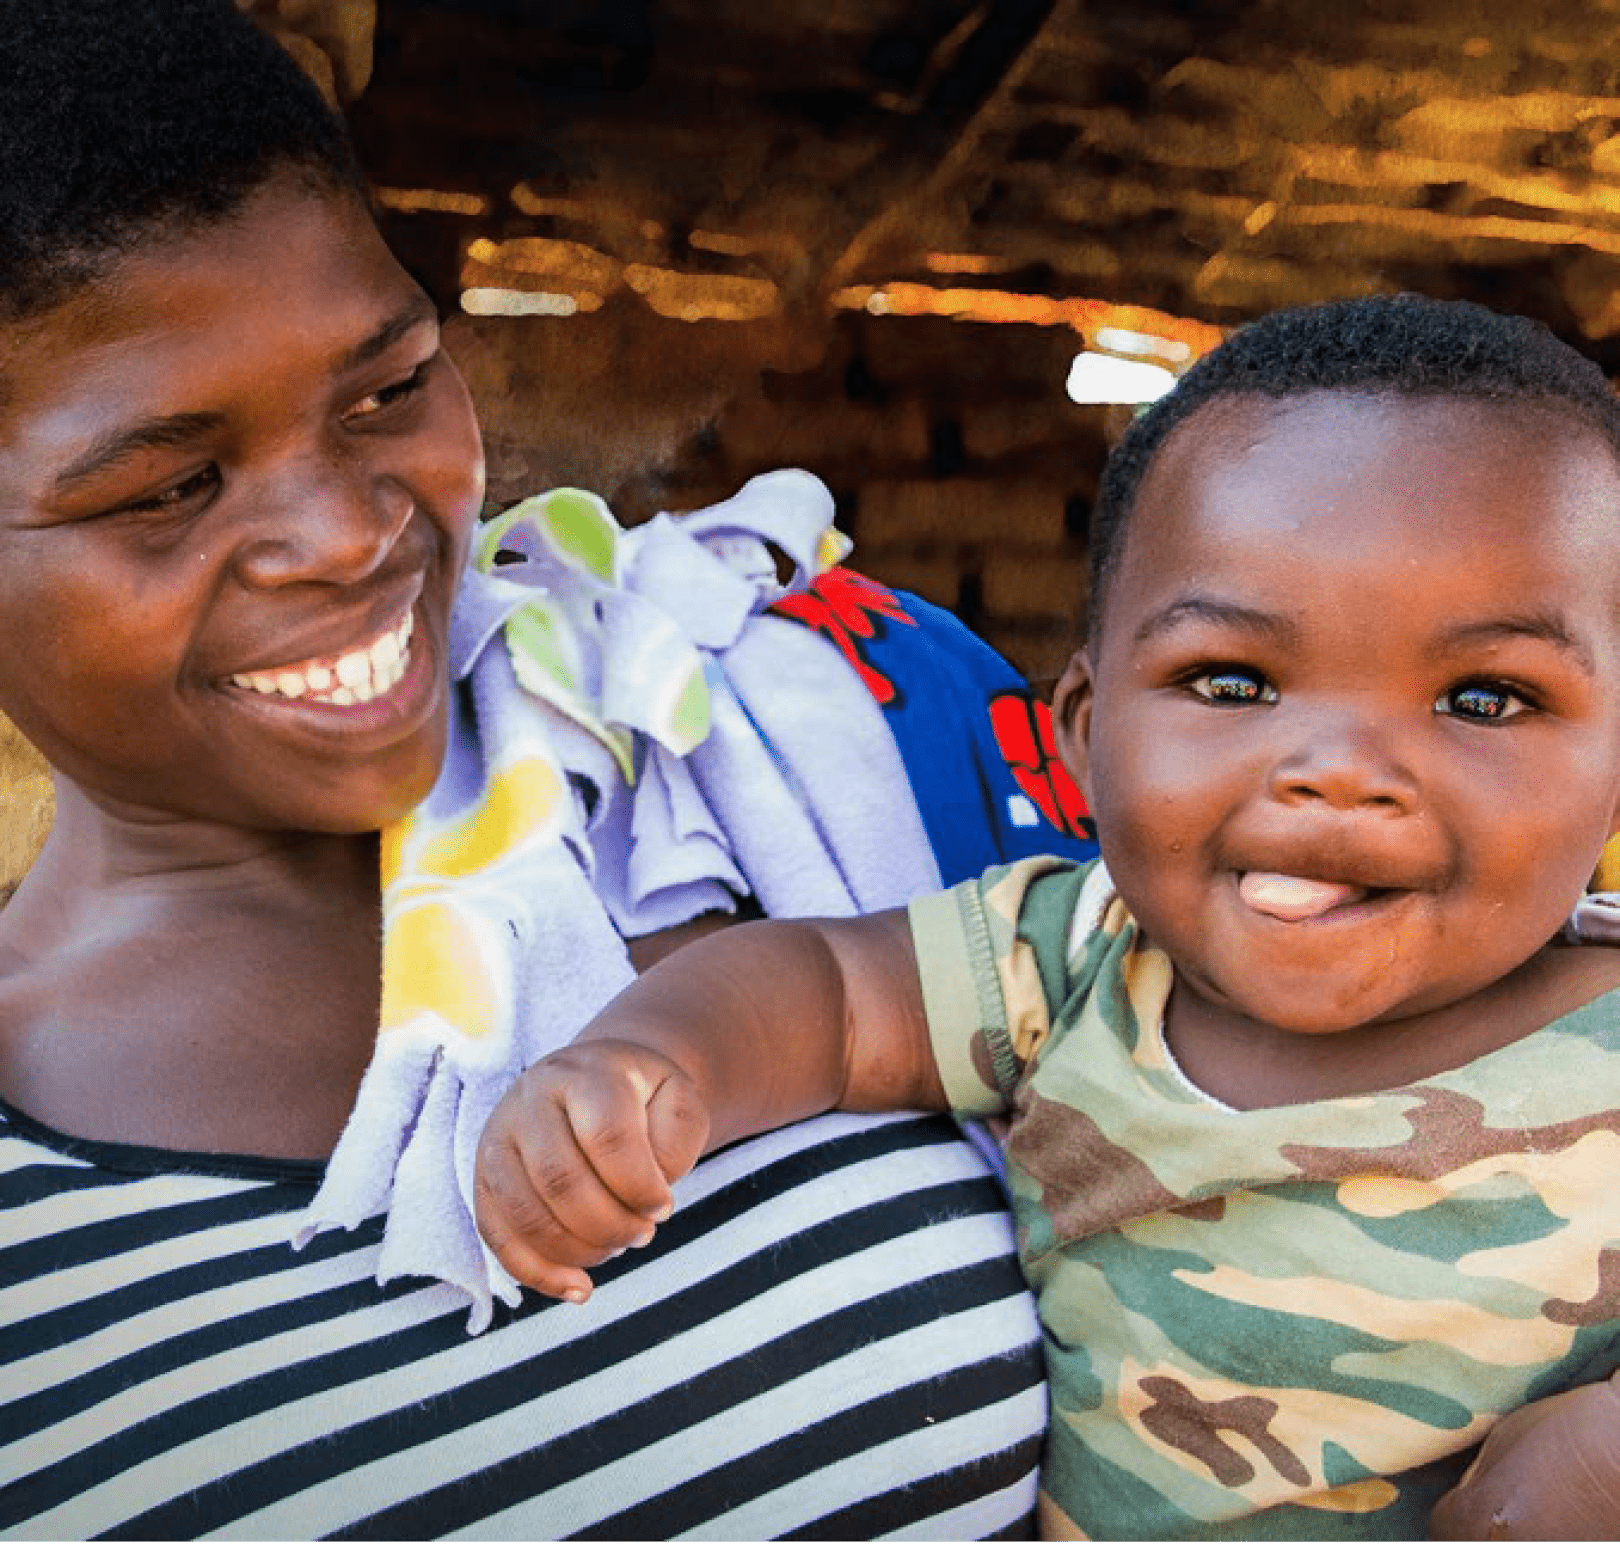 350M+ Women and children received vitamins and minerals through our partnership with Vitamin Angels since 2013